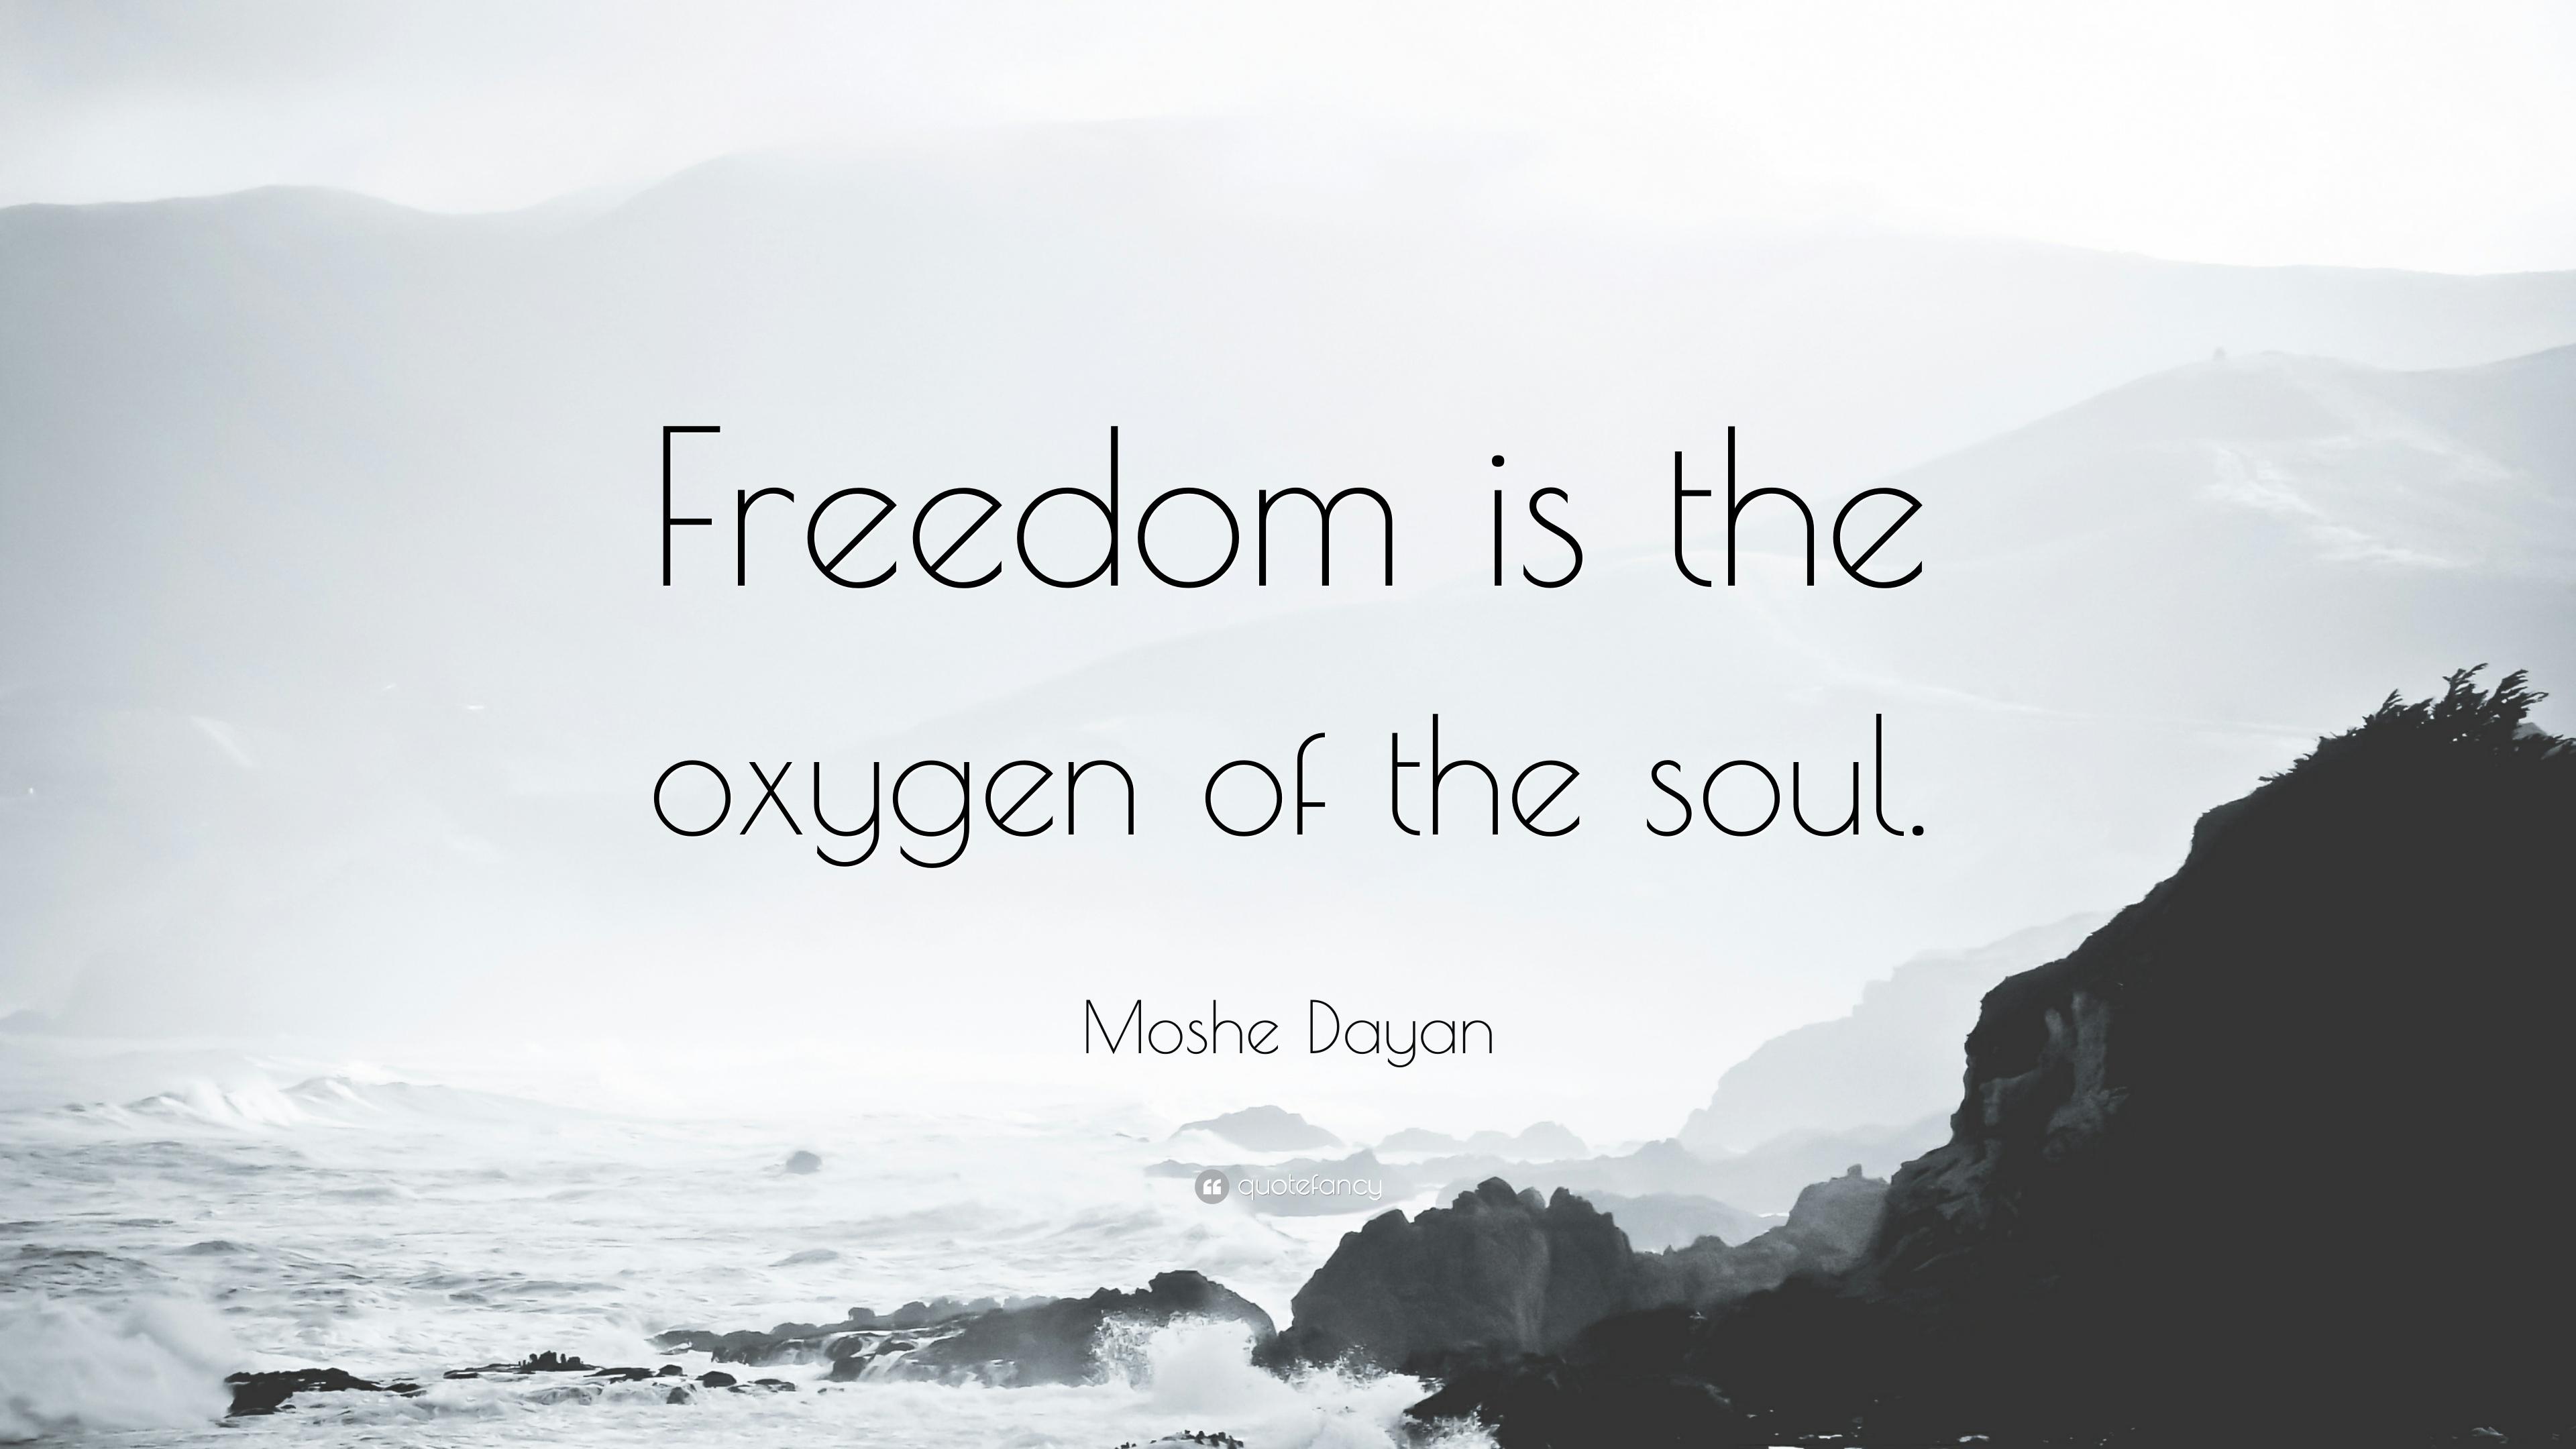 Moshe Dayan Quote: “Freedom is the oxygen of the soul.” 24